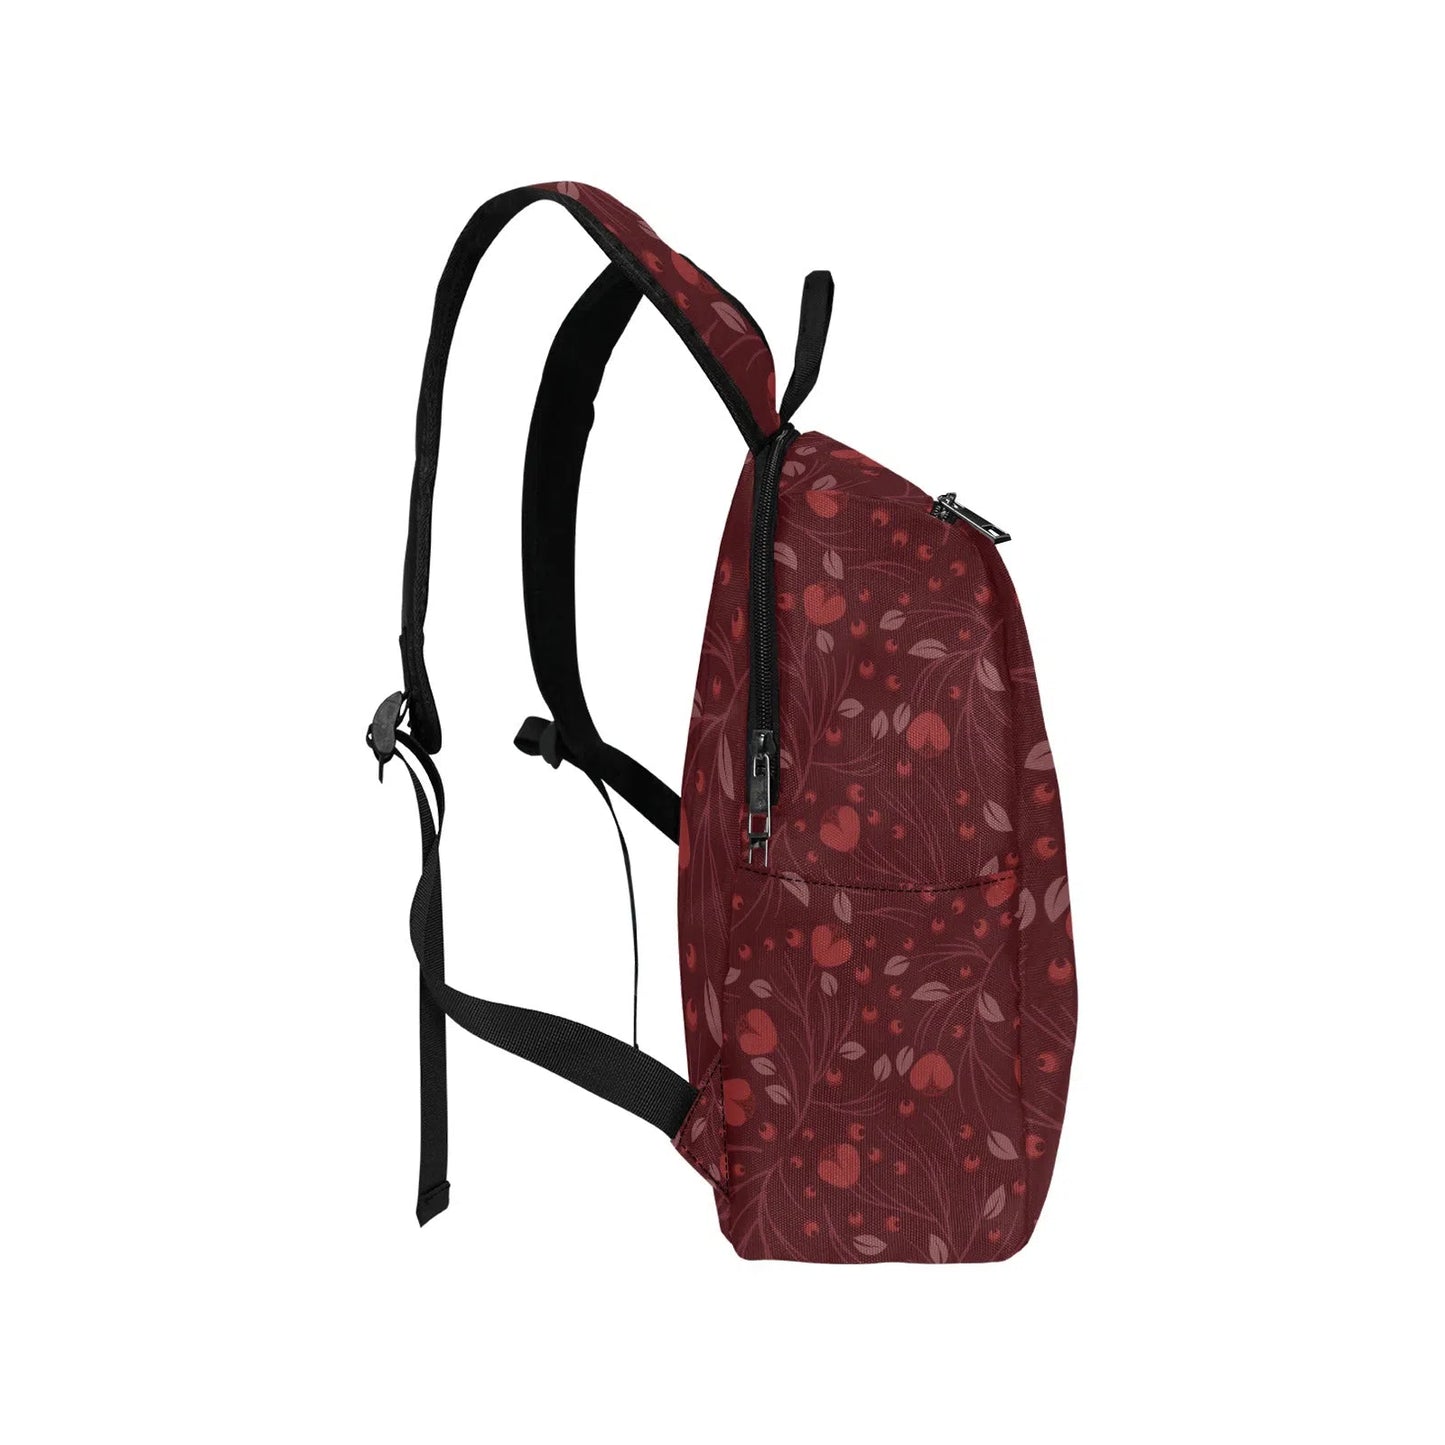 Floral Backpack, Red Poppy